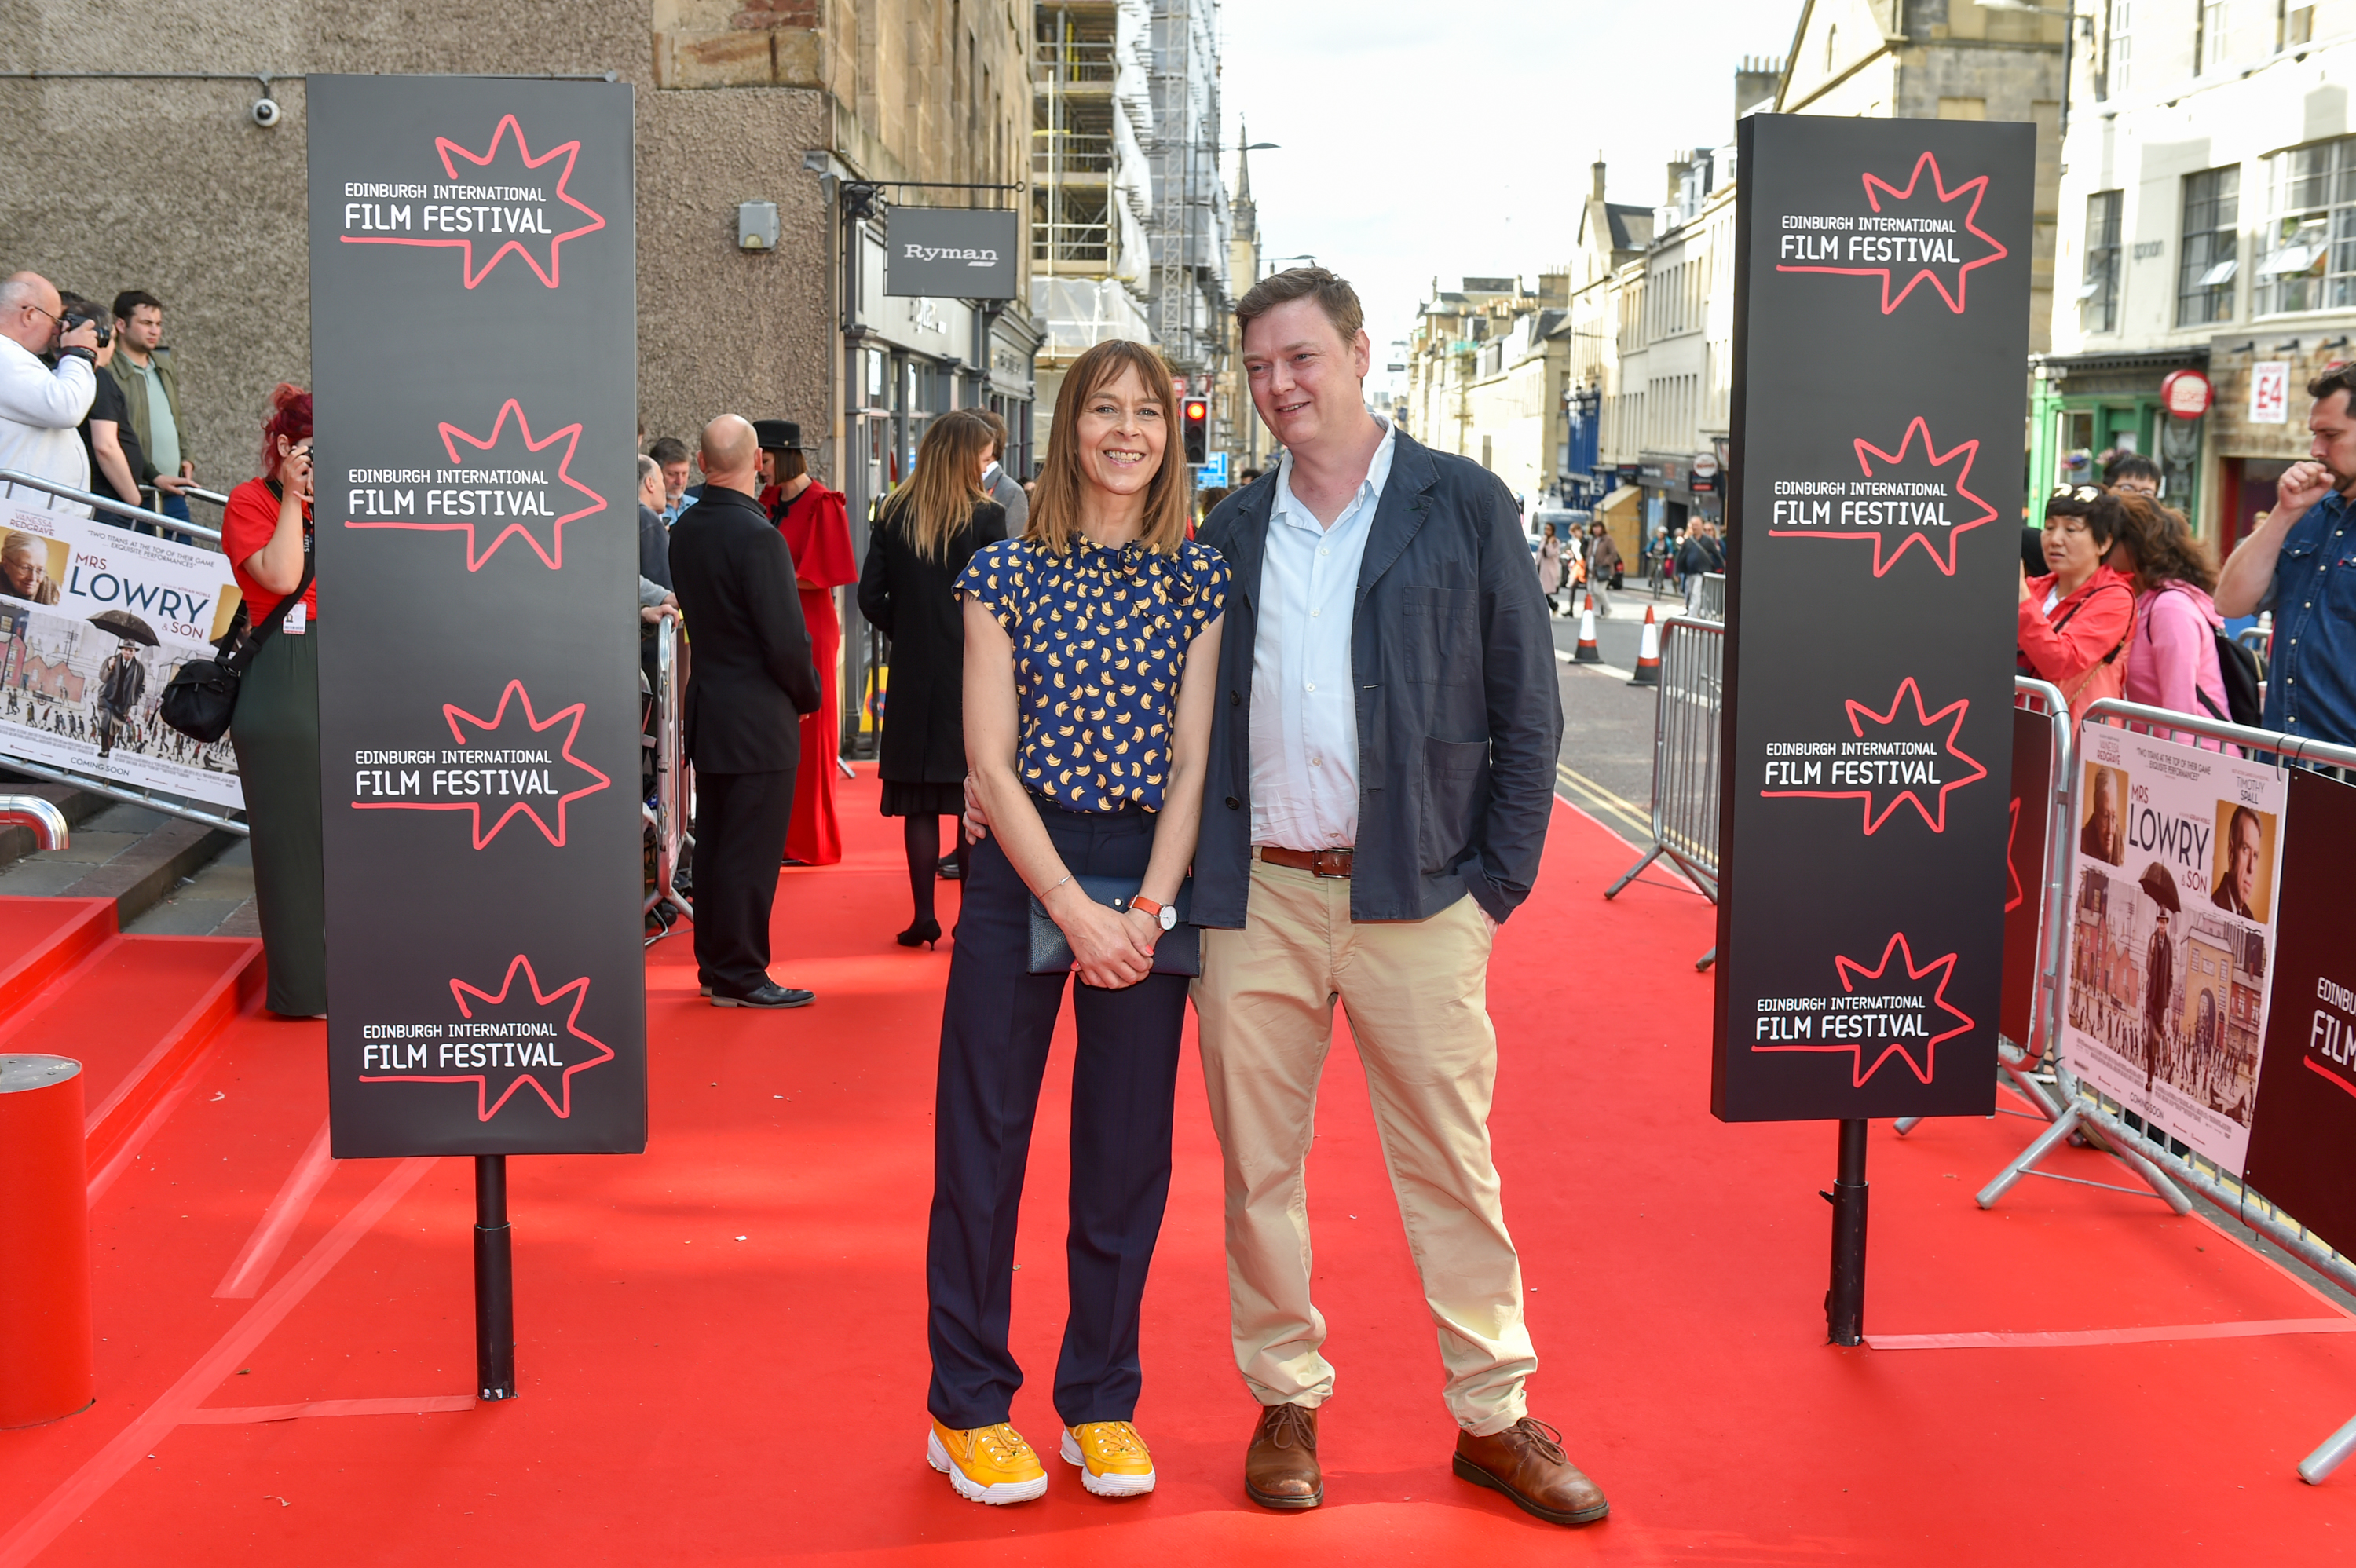 Kenny Dickie and Kate Dickie attend the world premiere of "Mrs Lowry & Son" and closing night gala of the 73rd Edinburgh International Film Festival at Festival Theatre on June 30, 2019, in Edinburgh, Scotland. | Source: Getty Images